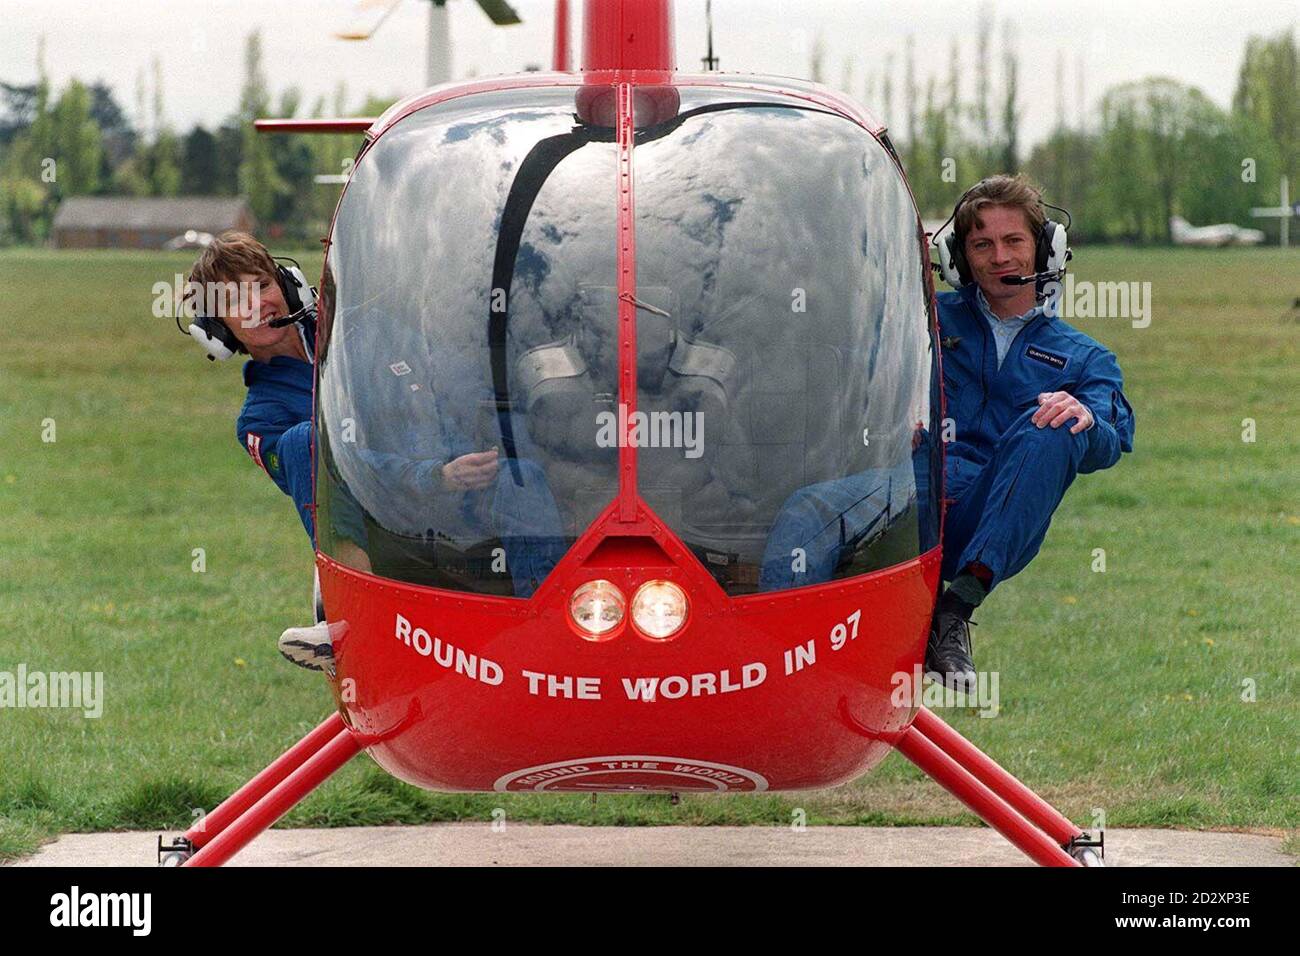 Jennifer Murray, a 56-year-old grandmother, is poised to fly into the record books as the first woman to pilot a helicopter around the world. This pioneering trip, which aims to raise 500,000 for Save The Children, takes off on May 10, 1997, from Denham, Middlesex, where Jennifer is pictured today with co-pilot Quentin Smith, 32. Photo by Sam Pearce. Stock Photo